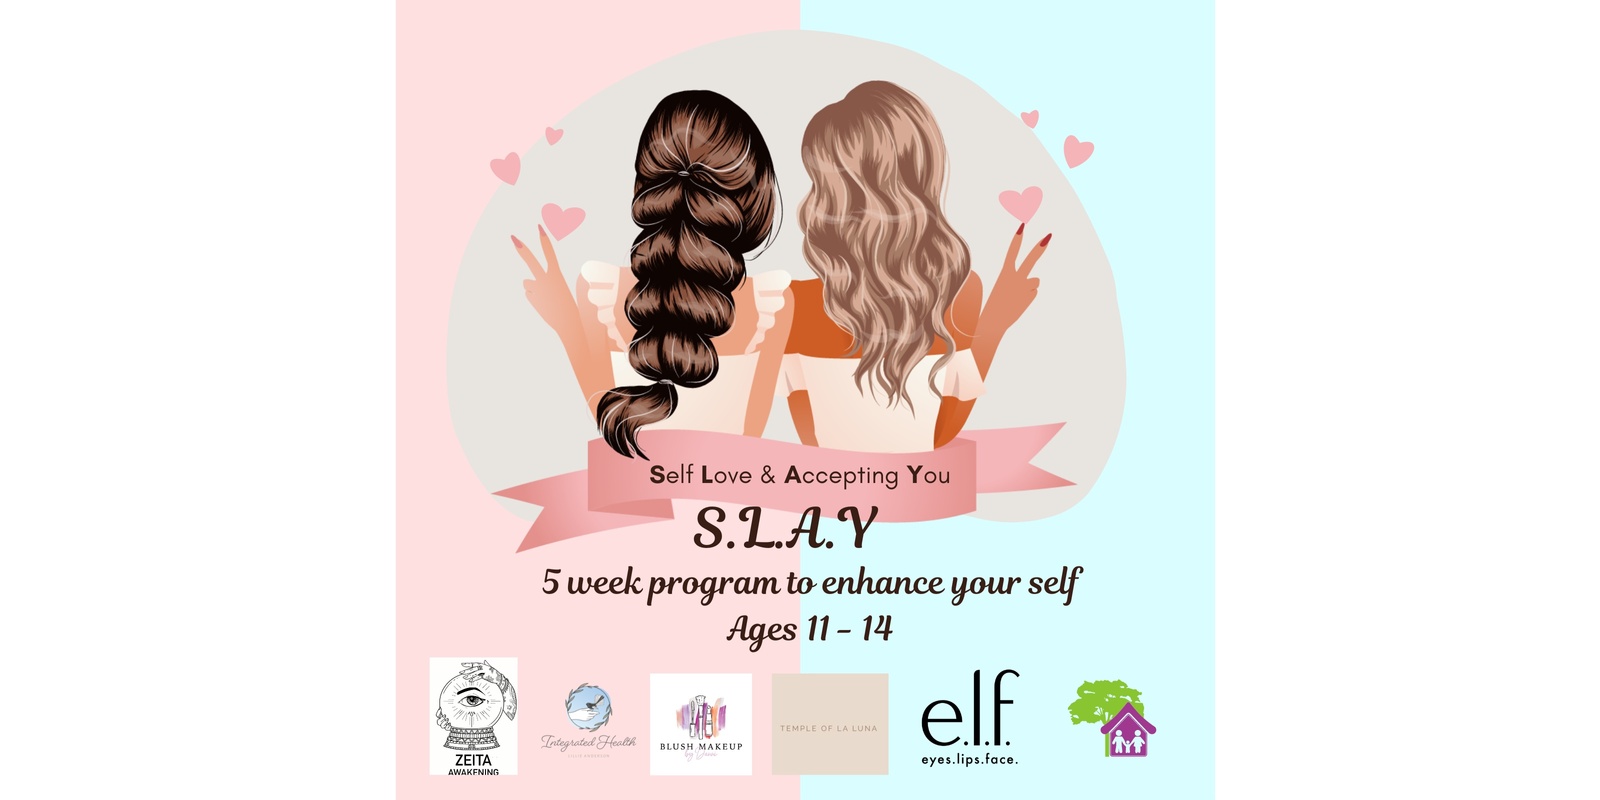 Banner image for S.L.A.Y - Self Love & Accepting You